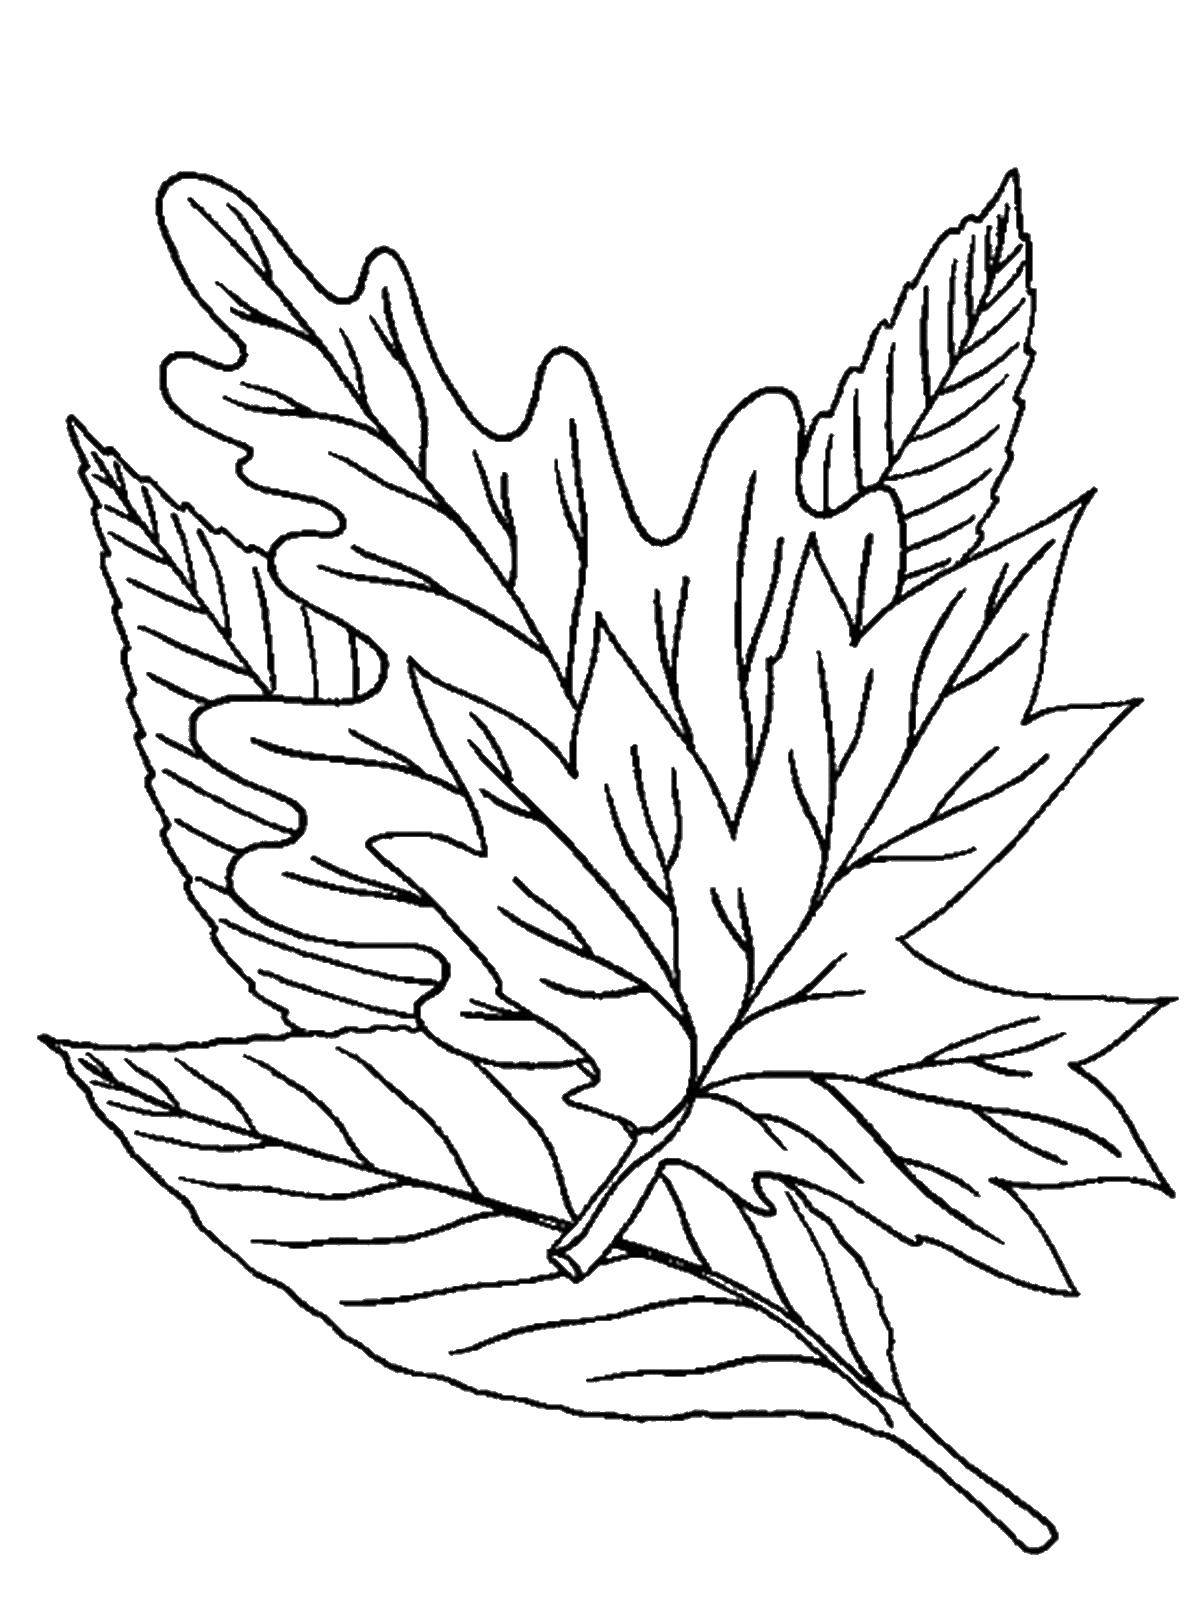 Coloring Leaves. Category leaves. Tags:  leaves.